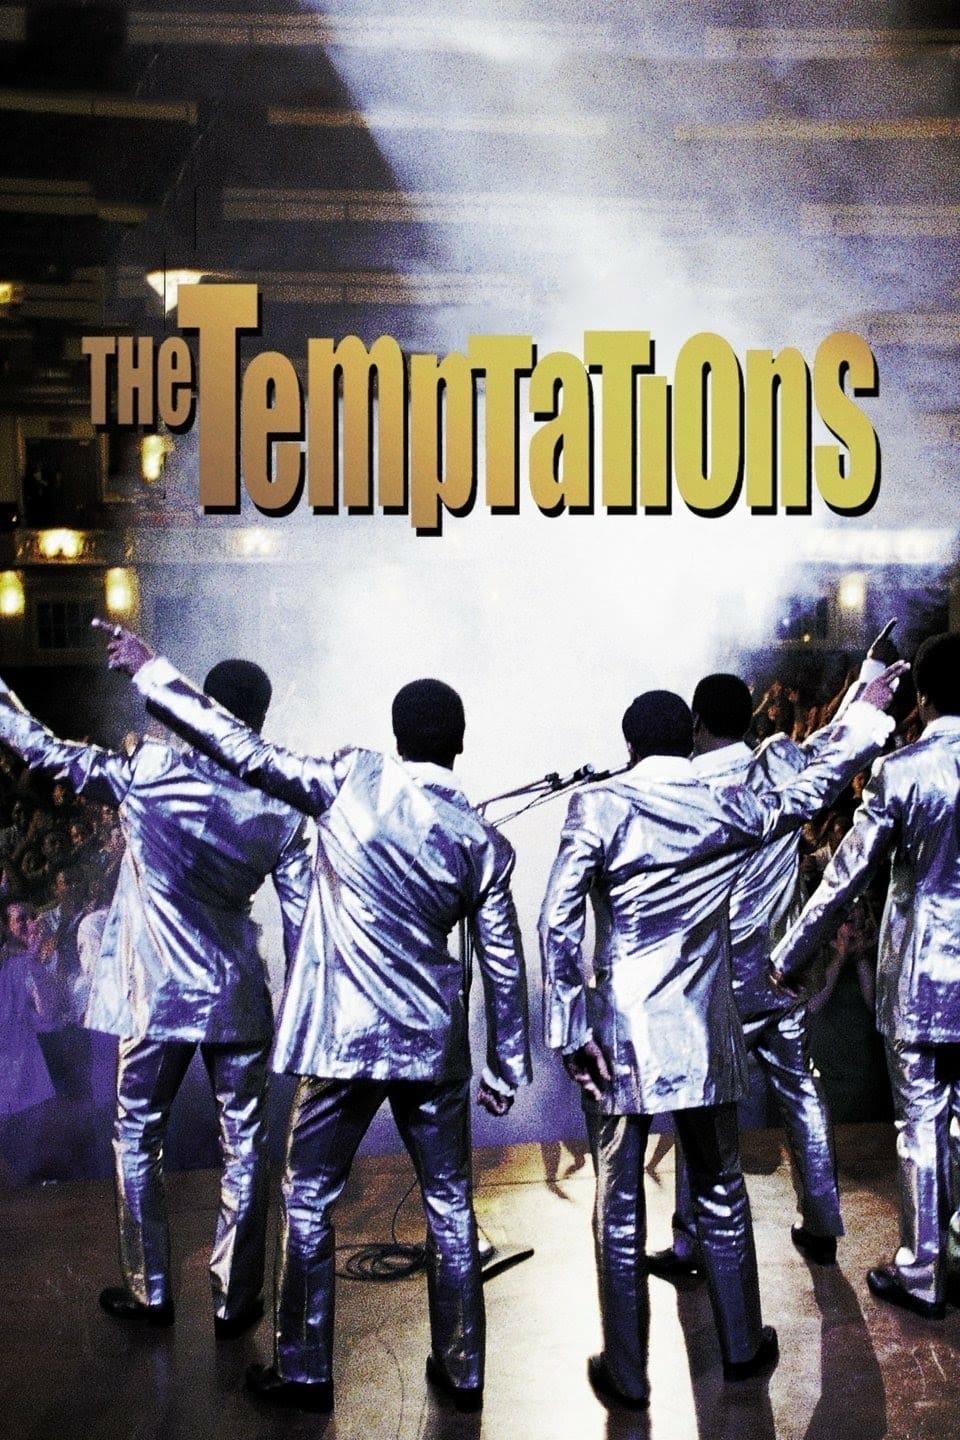 cyrus armani recommends watch the temptations free pic